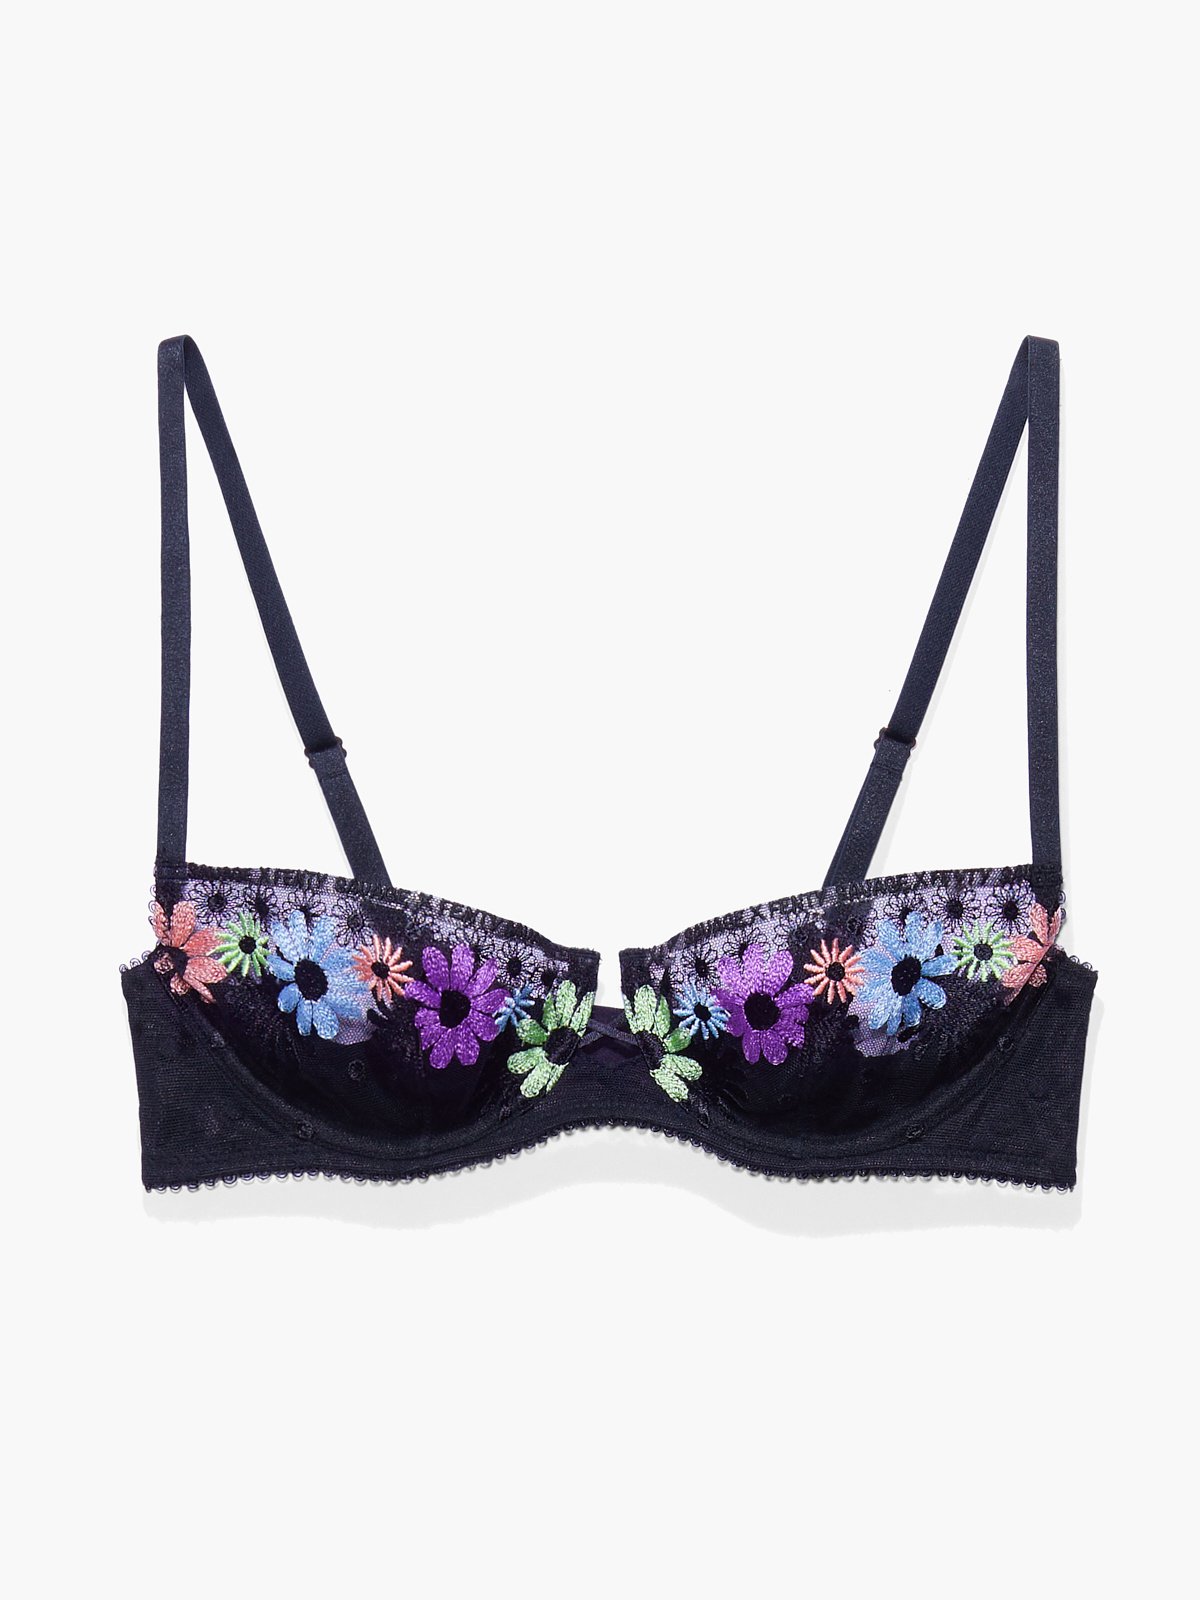 Free Spirit Floral Embroidery Unlined Balconette Bra in Black | SAVAGE ...